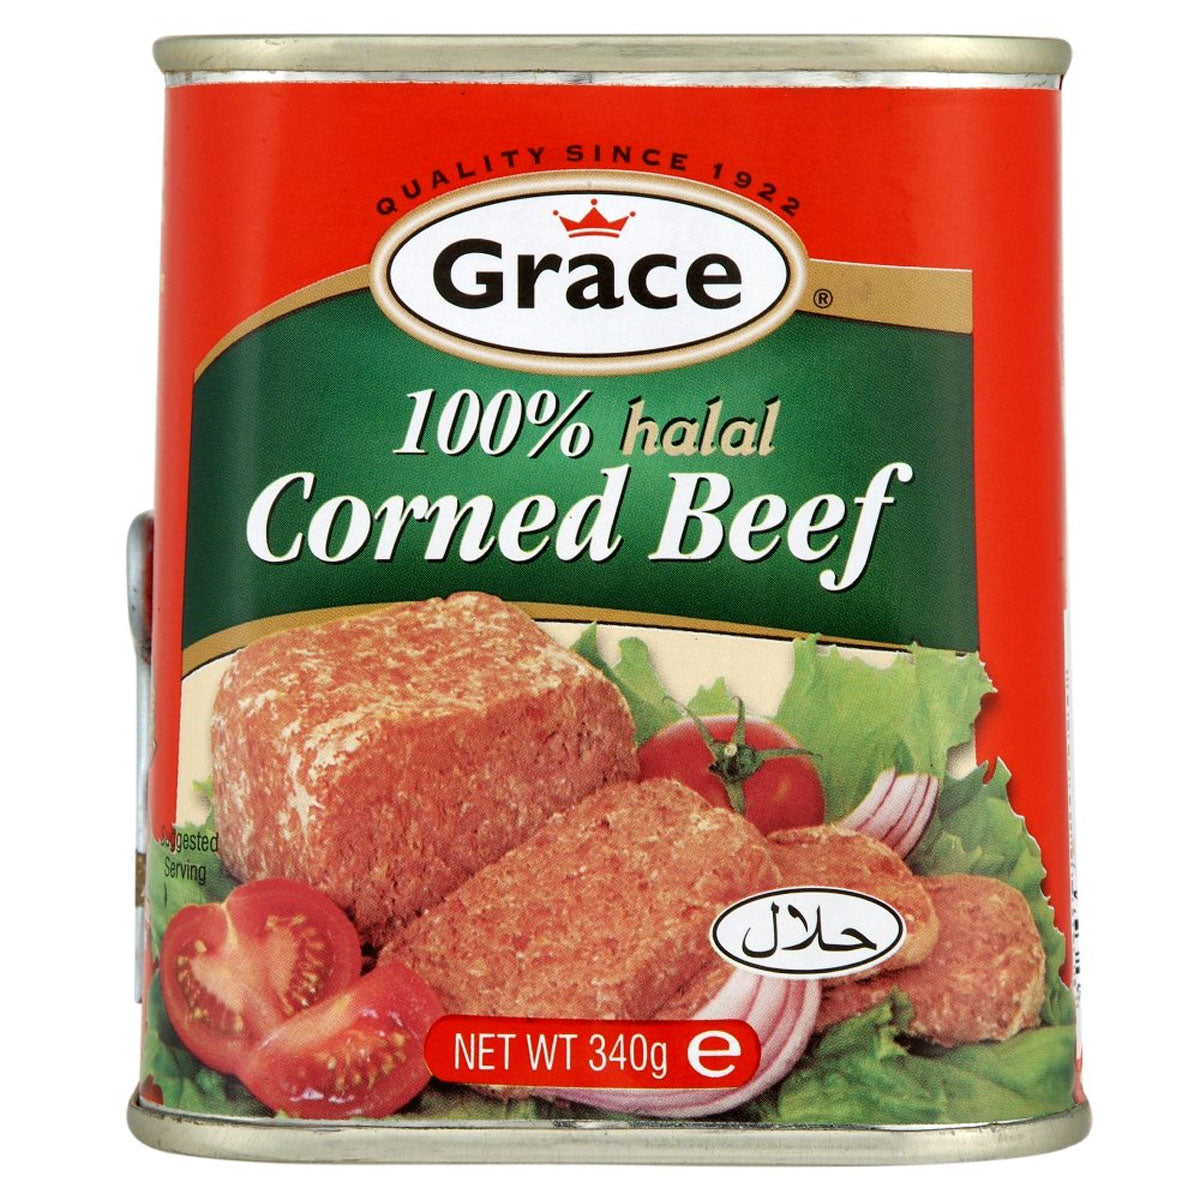 Grace - 100% Halal Corned Beef - 340g - Continental Food Store